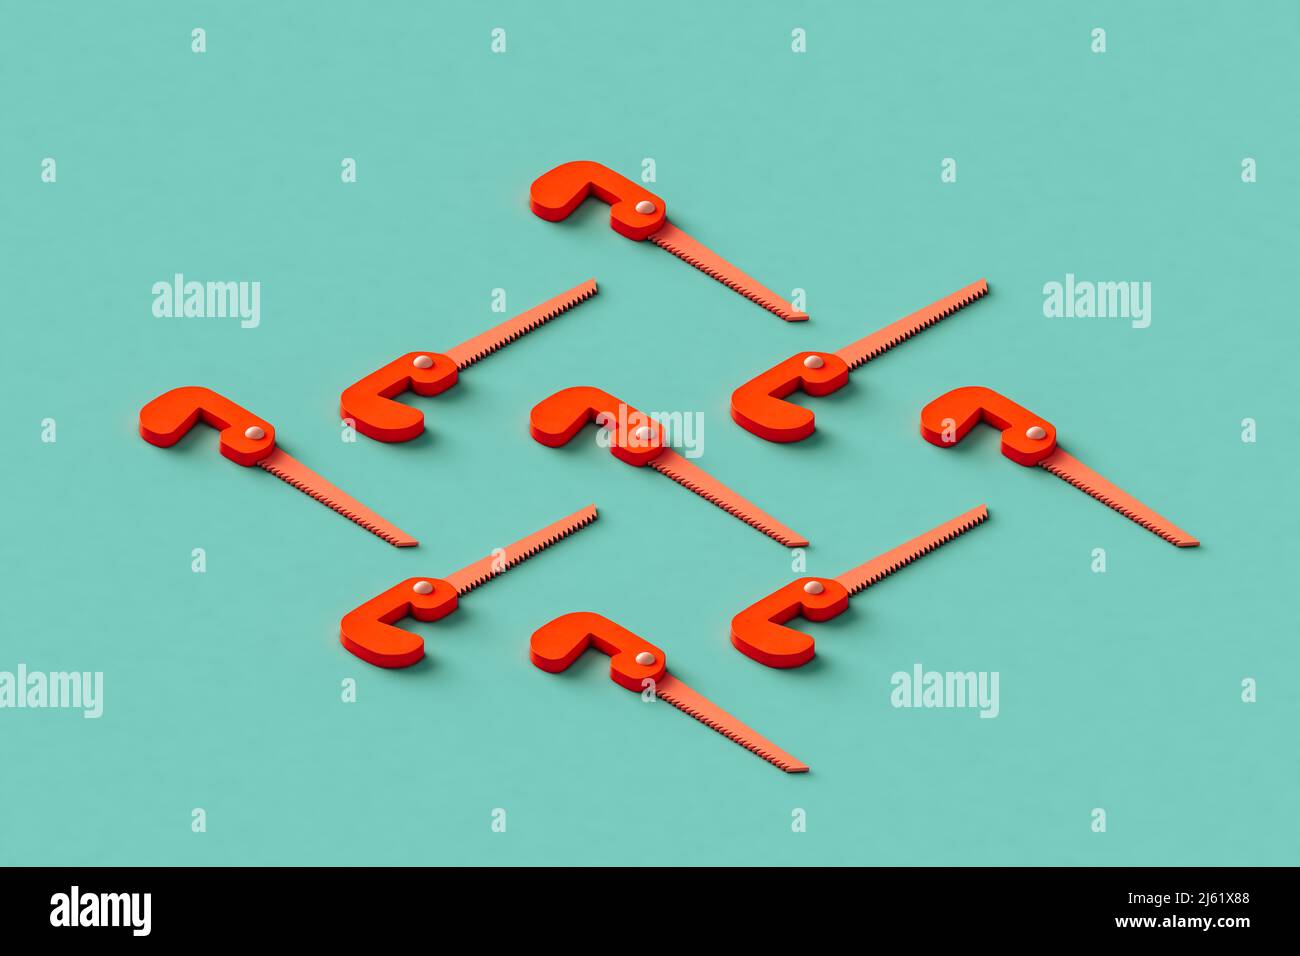 Three dimensional render of red hand saws flat laid against green background Stock Photo